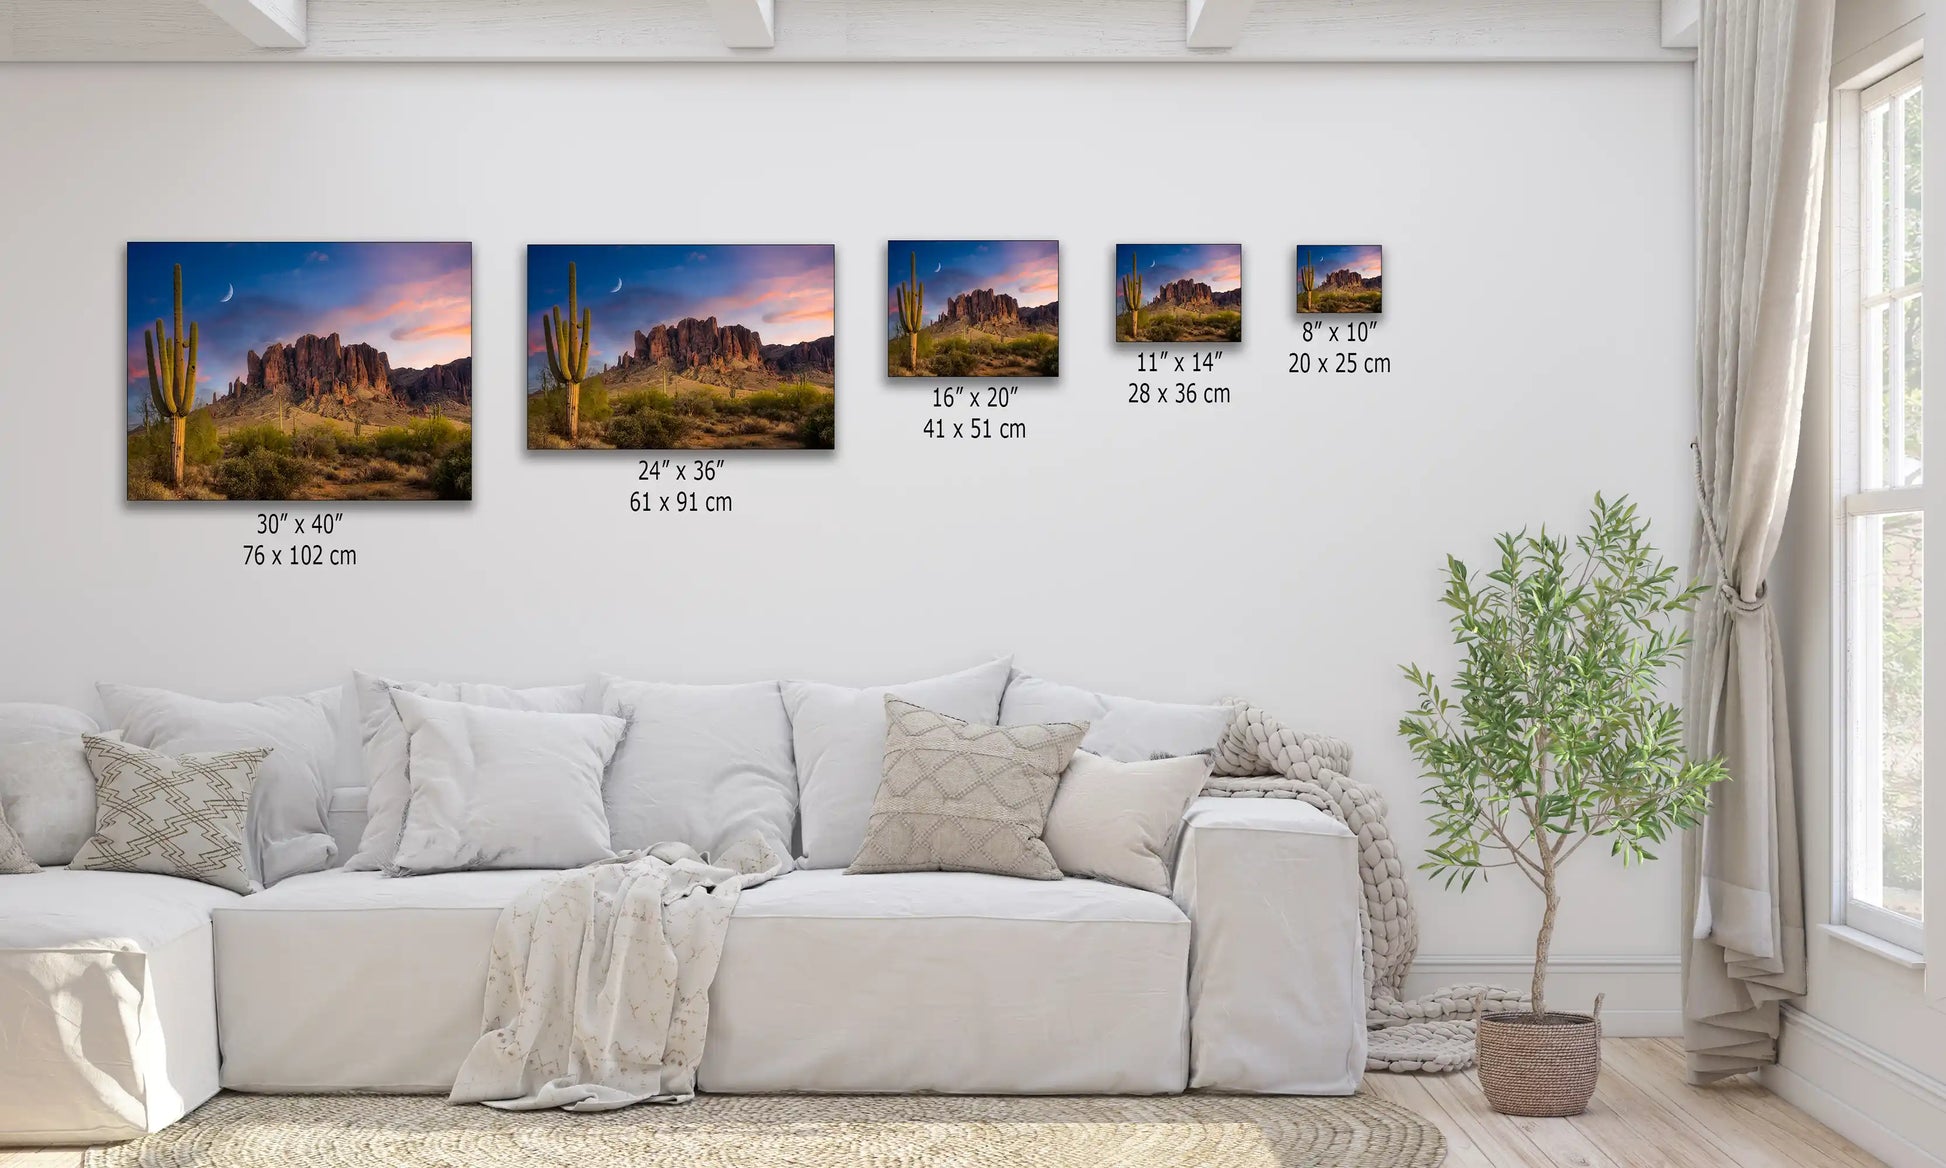 Various sized canvas prints of a Saguaro Cactus Sunset at Arizona's Superstition Mountains, perfect for creating a tailored desert ambiance.